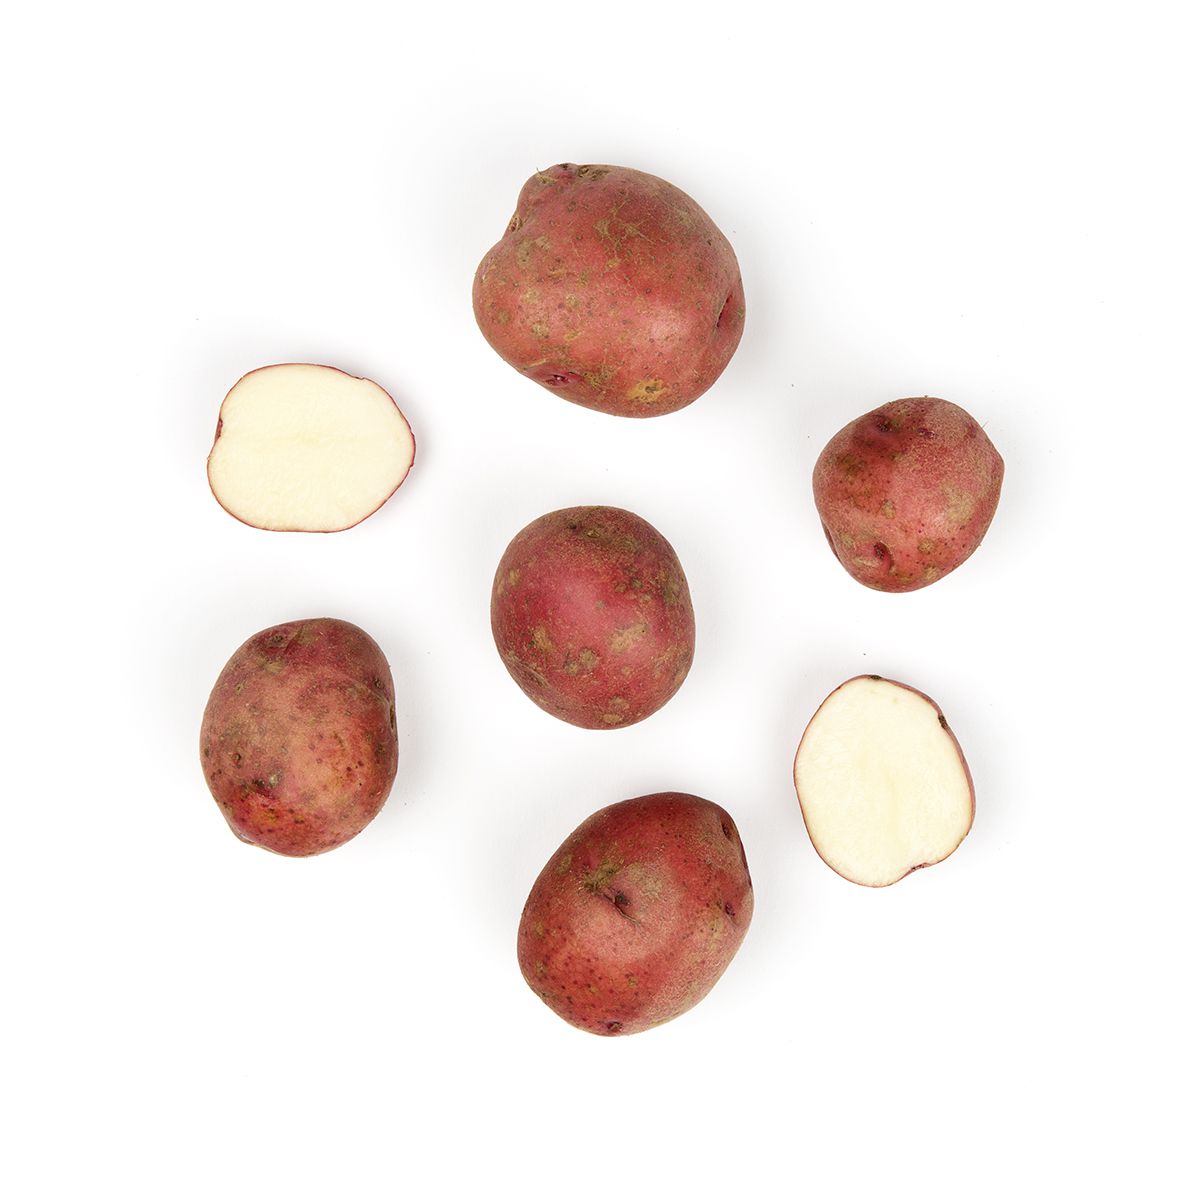 BoxNCase Red Bliss Potatoes